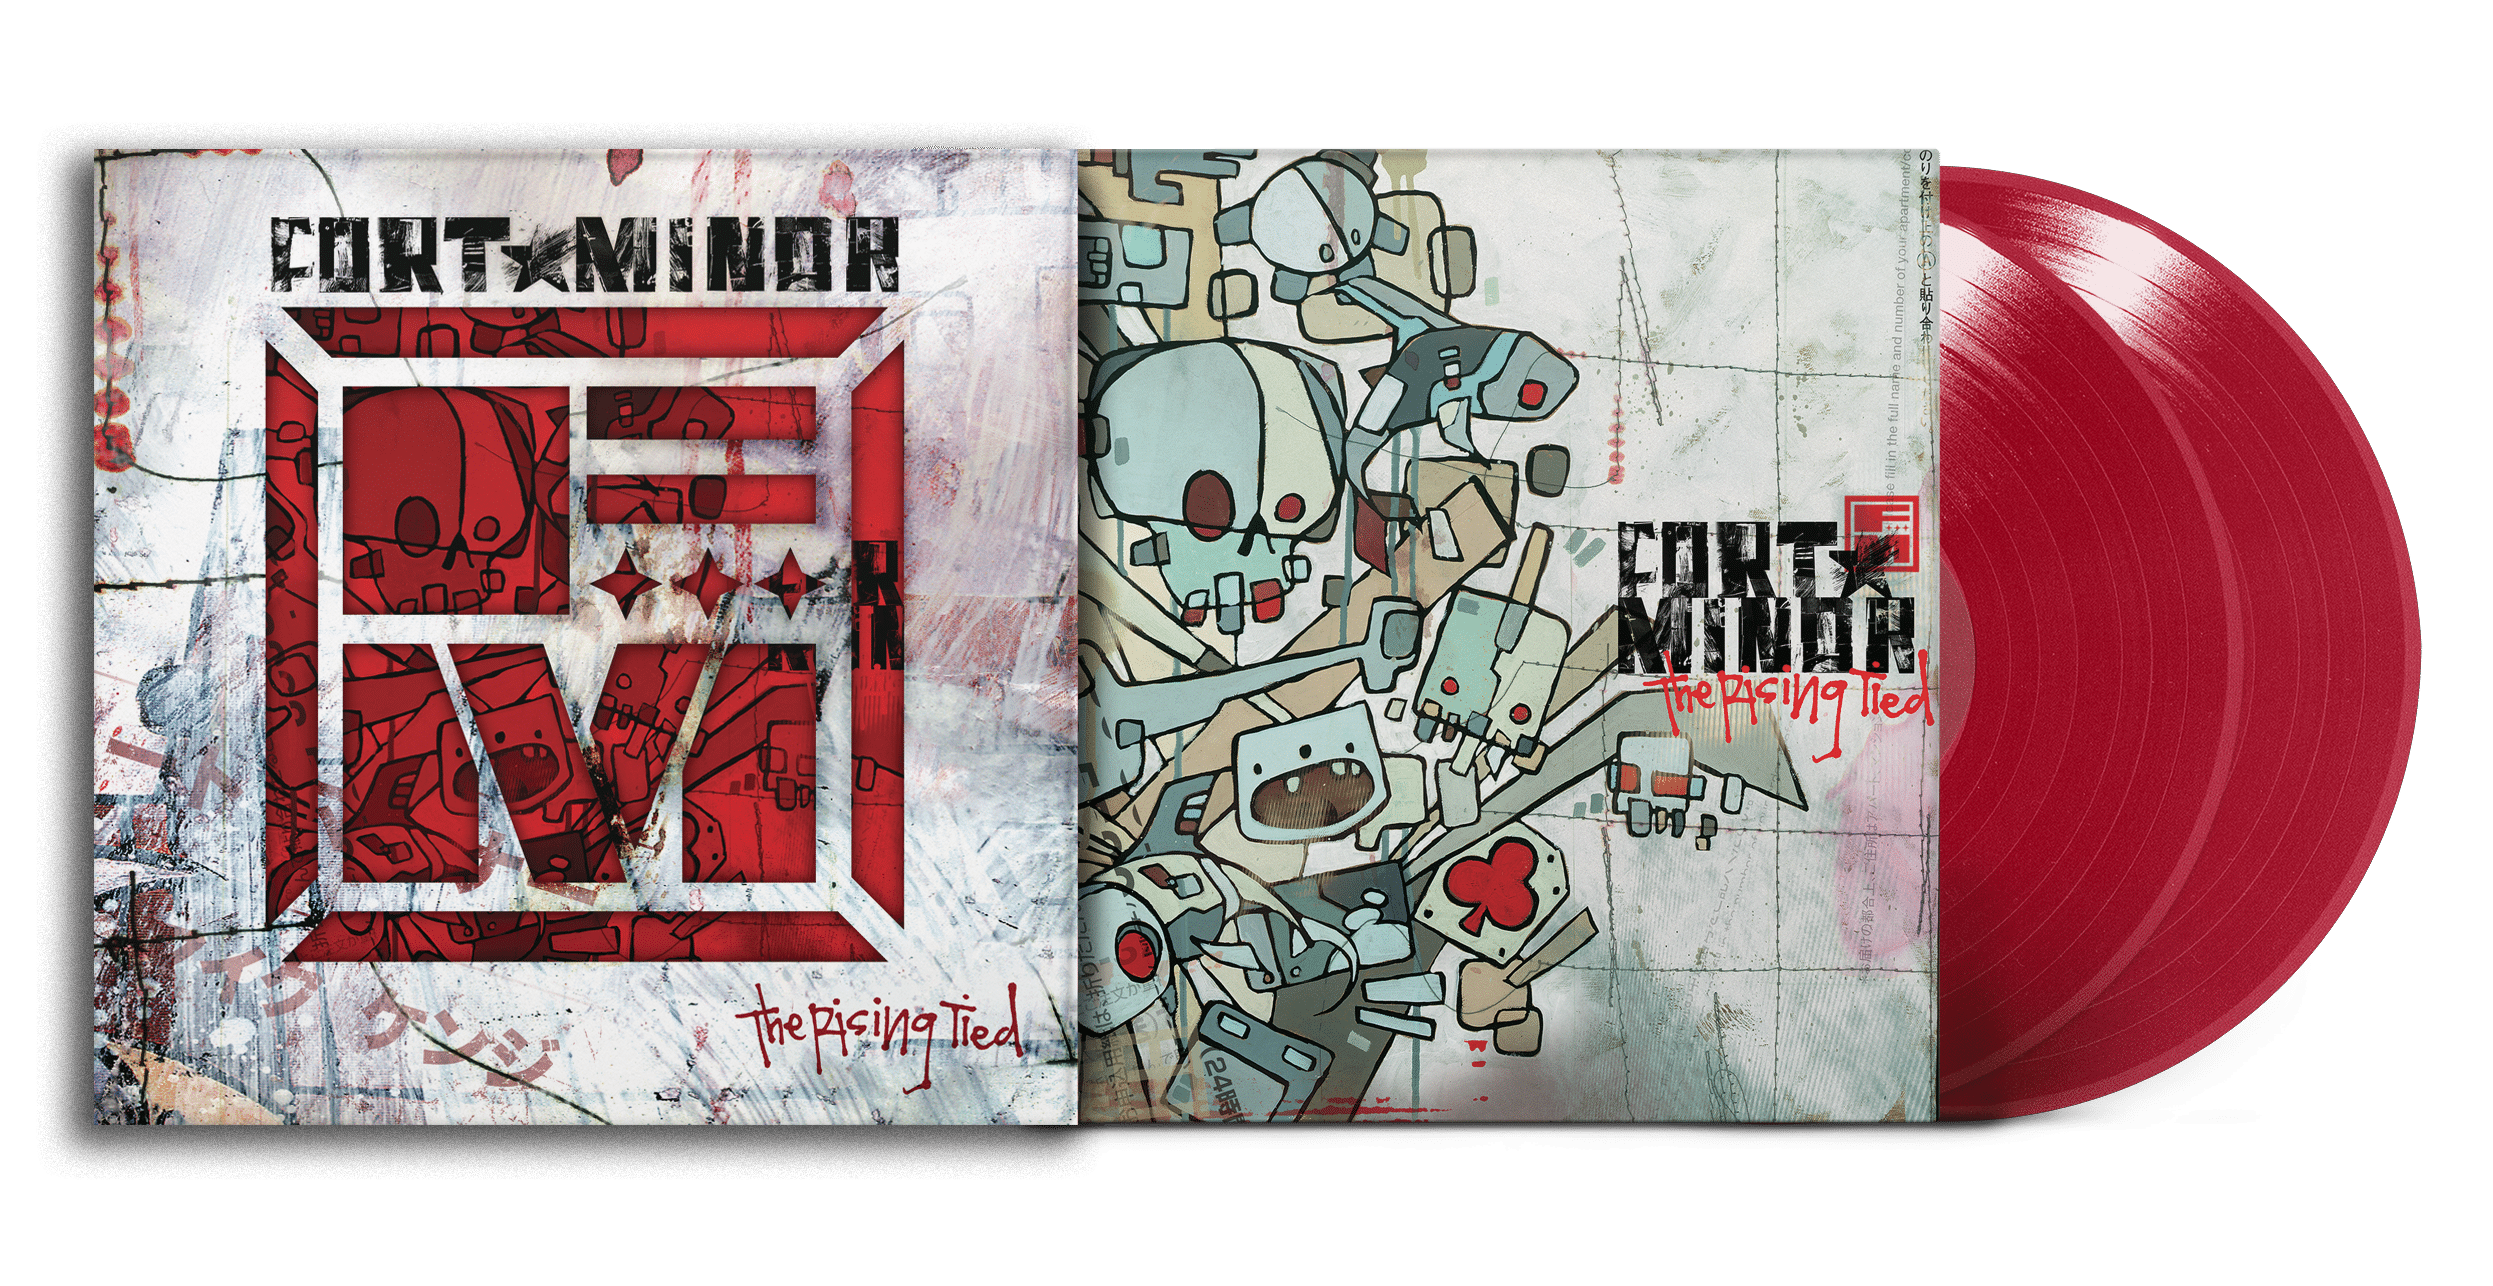 FORT MINOR - THE RISING TIED (DELUXE EDITION)